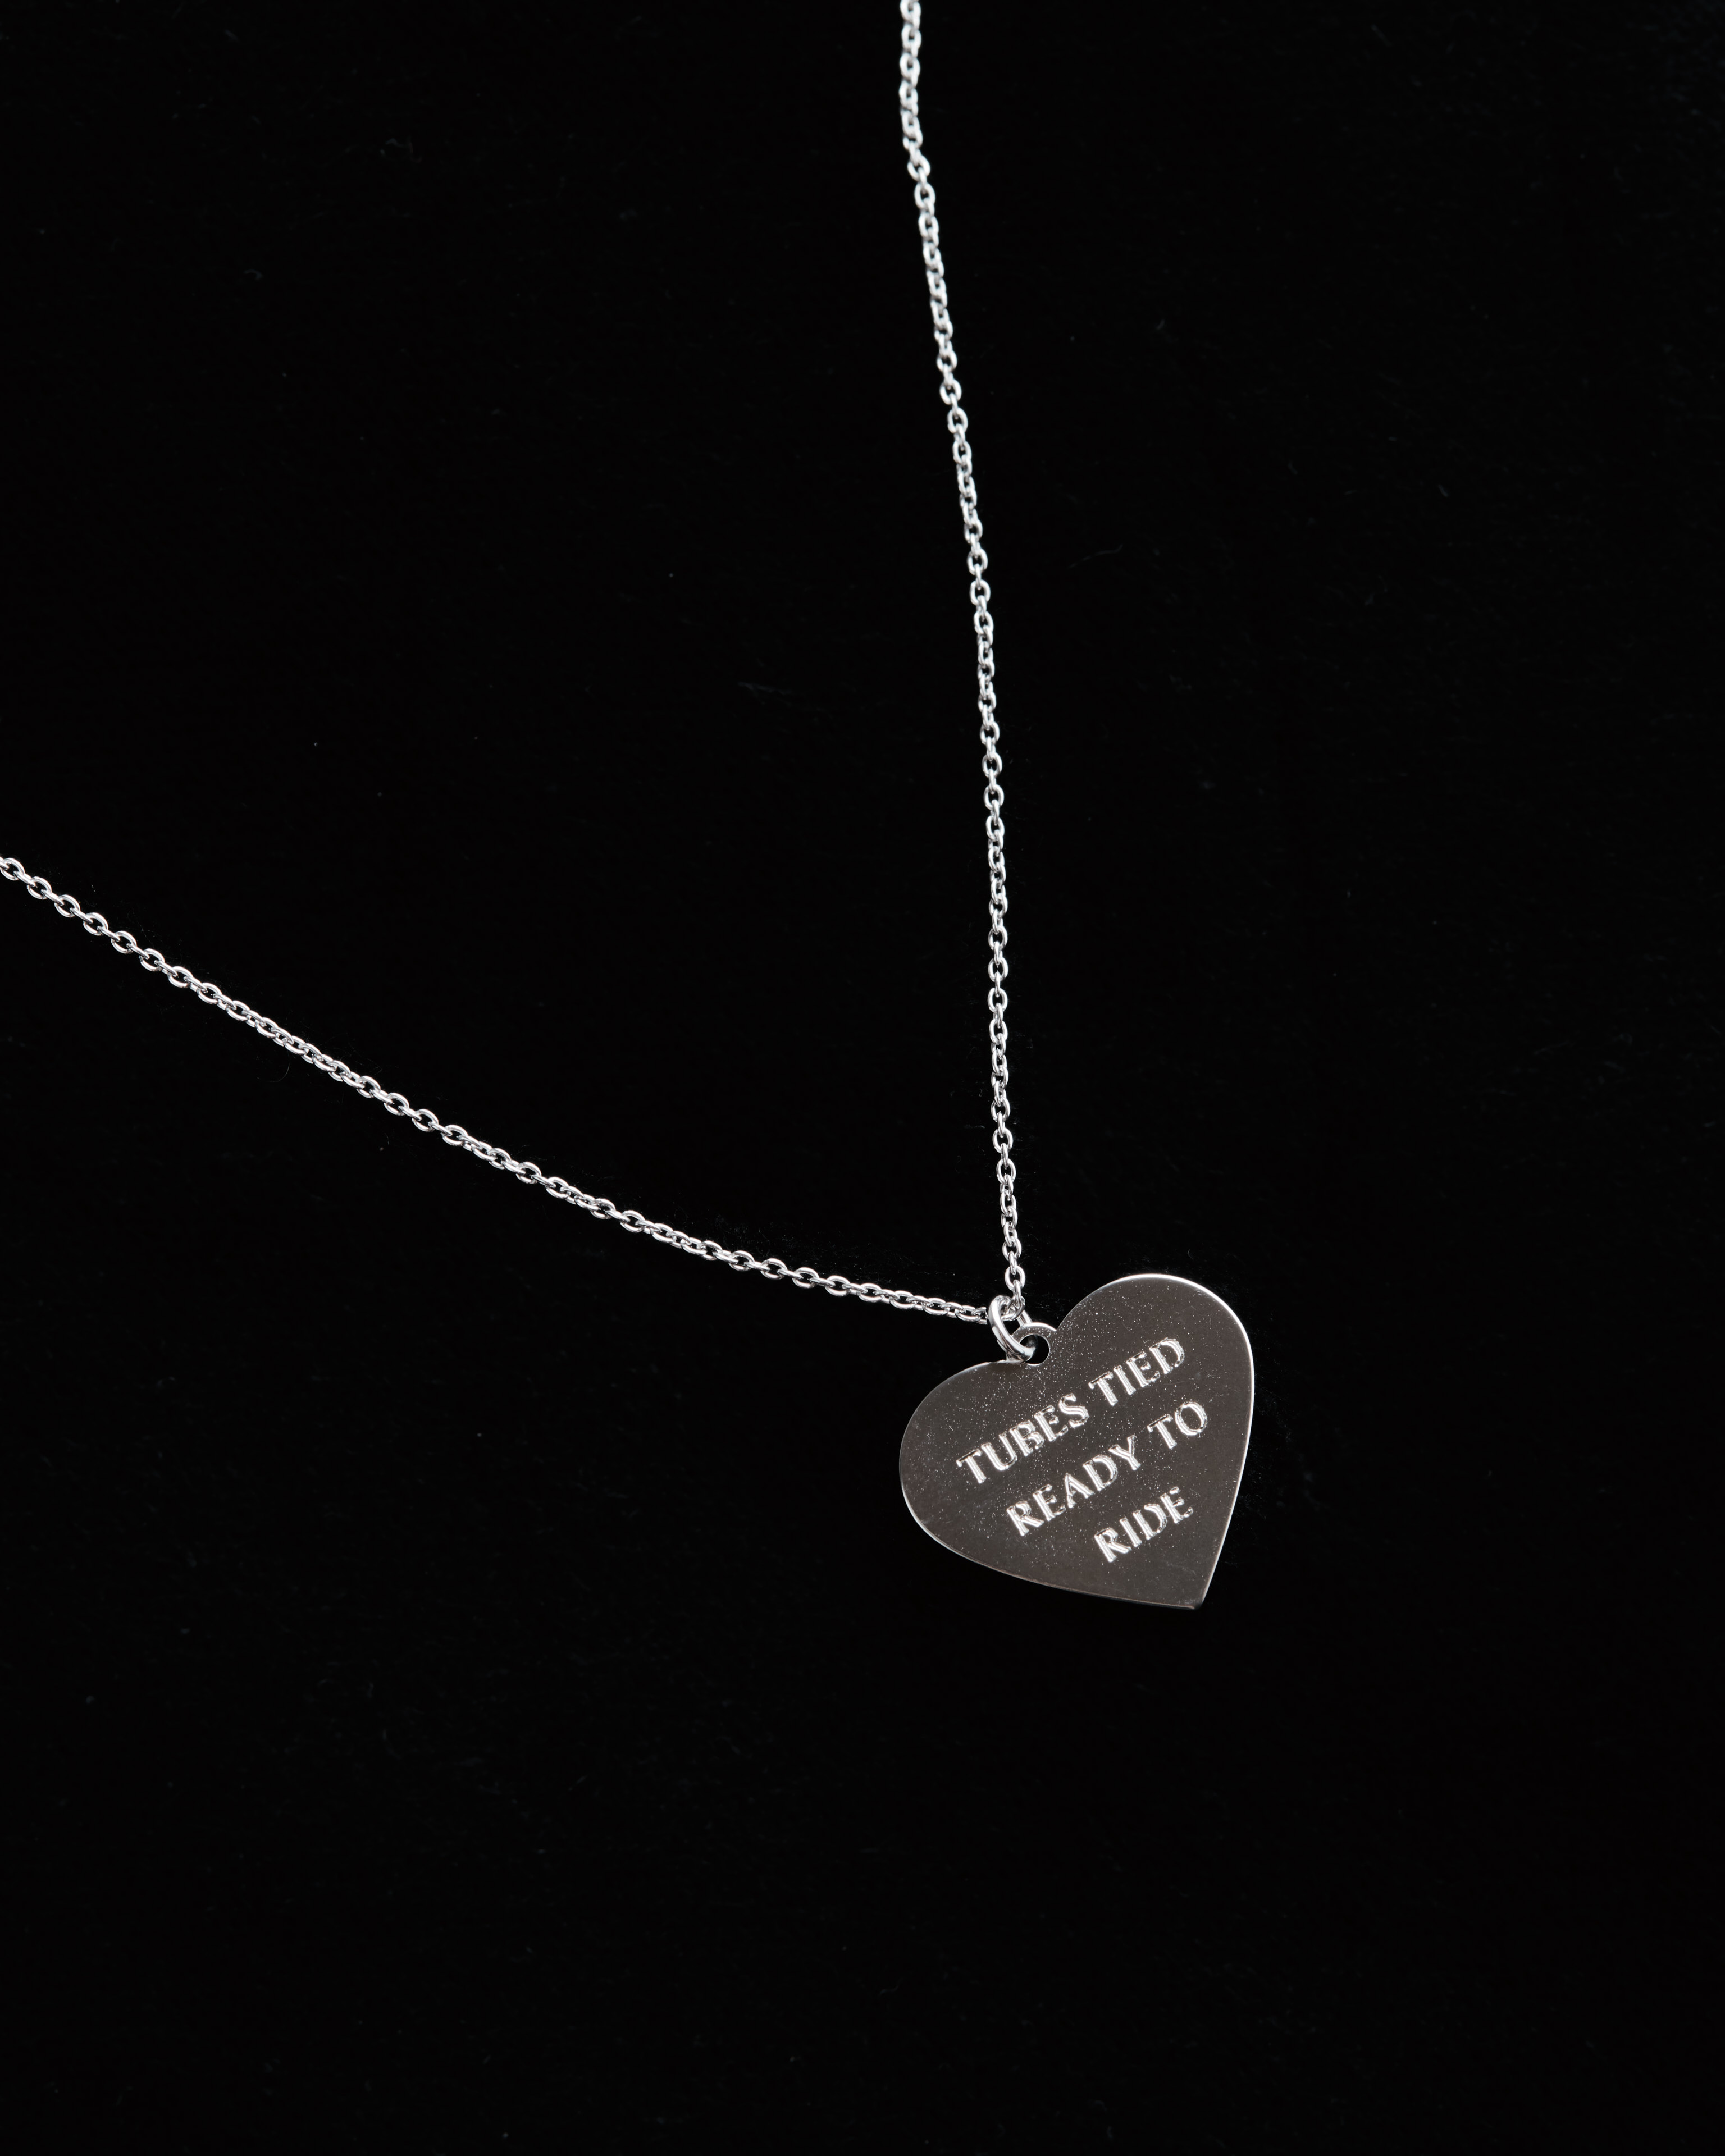 Tubes Tied Ready to Ride engraved silver heart necklace close-up